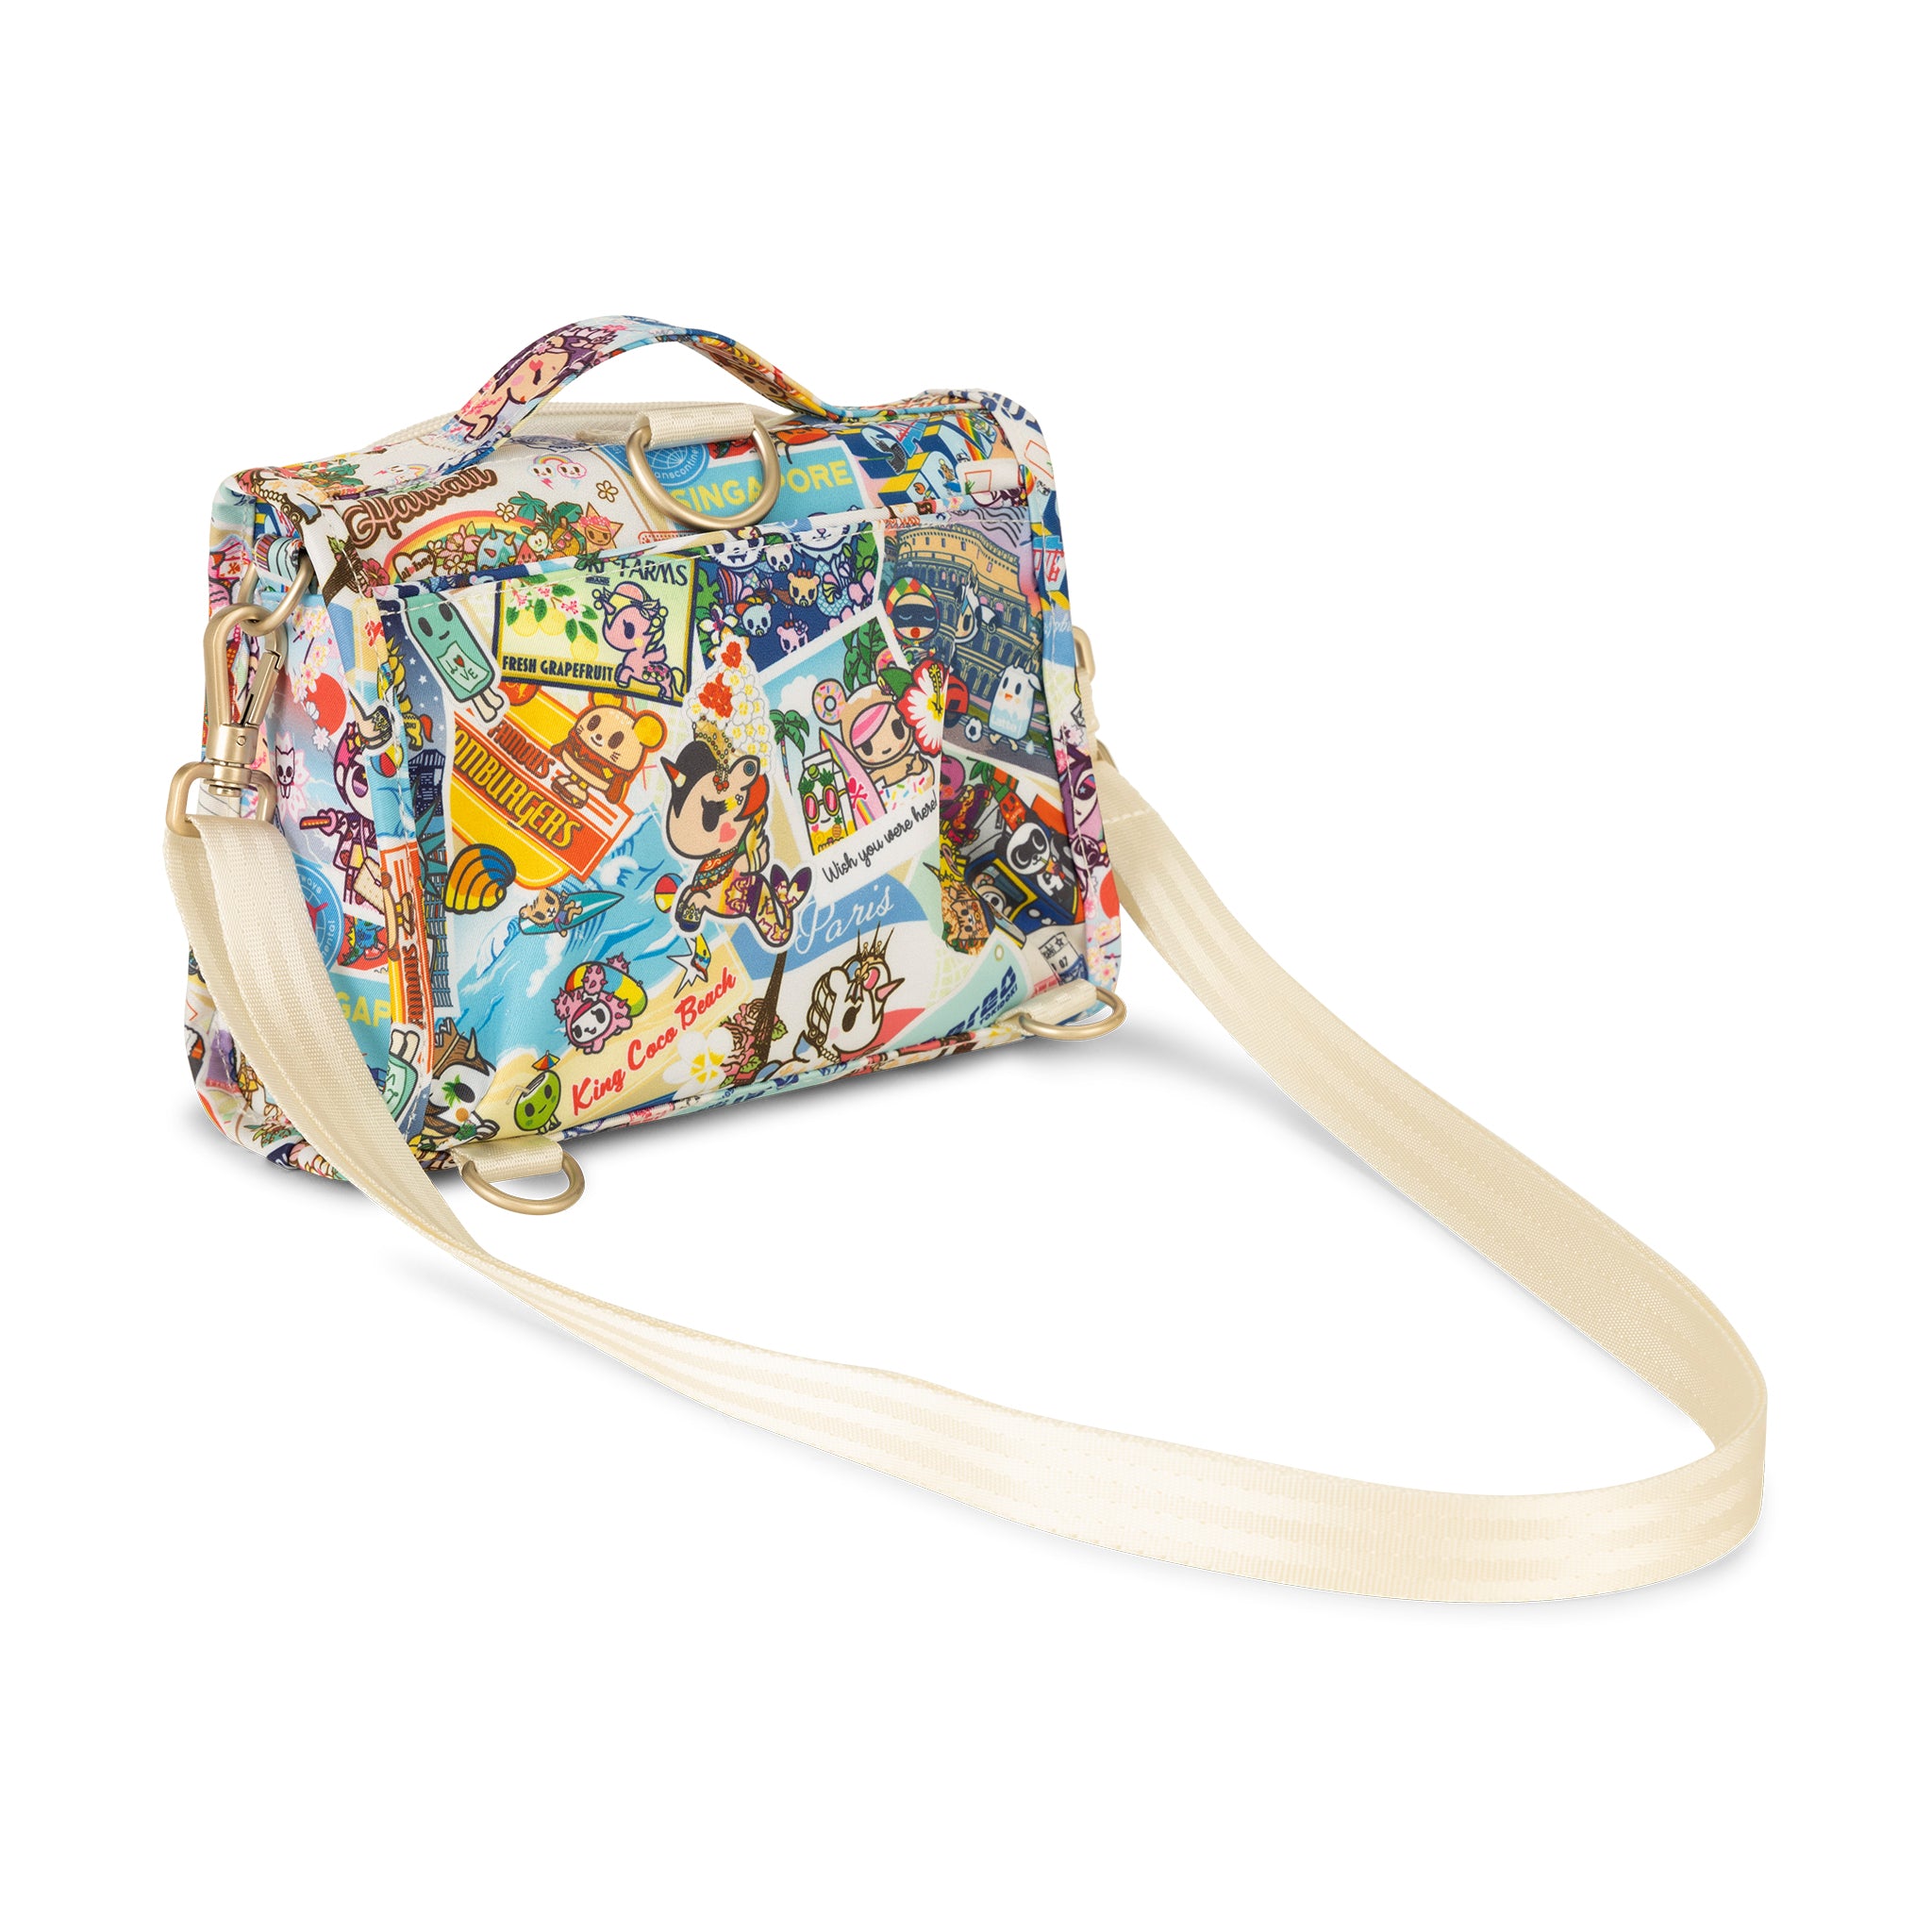 Multicolor Postcards with tokidoki characters traveling Mini B.F.F Crossbody Bag Back View with Strap